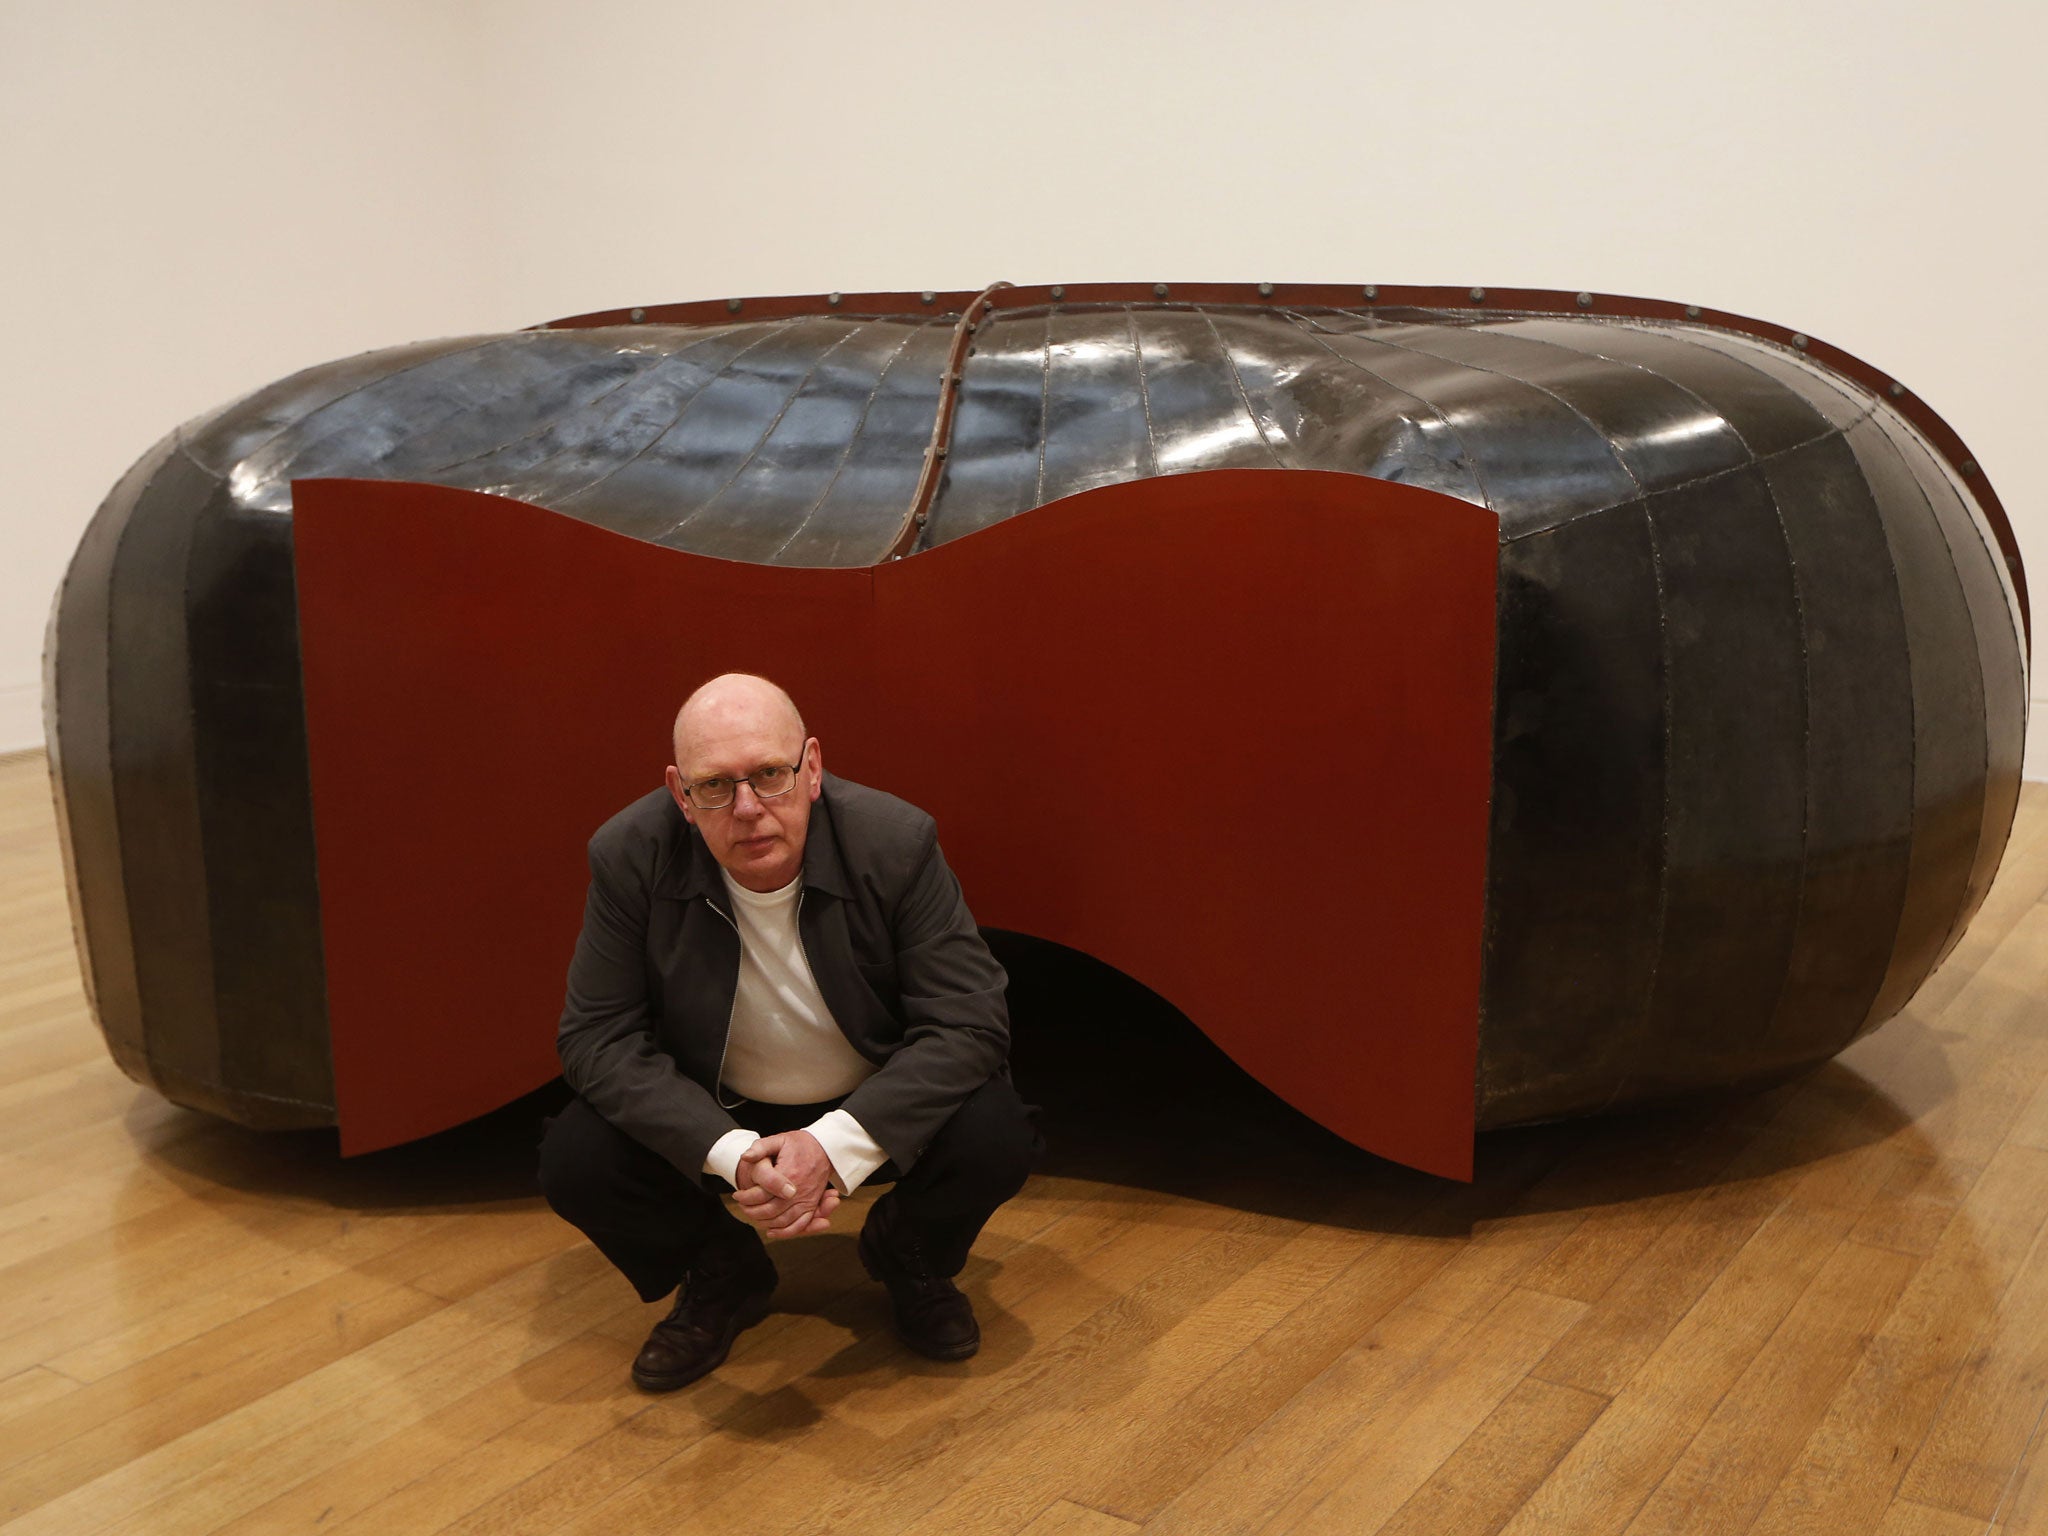 British artist and Turner Prize winner Richard Deacon poses with his sculpture 'Struck Dumb 1988' at Tate Britain